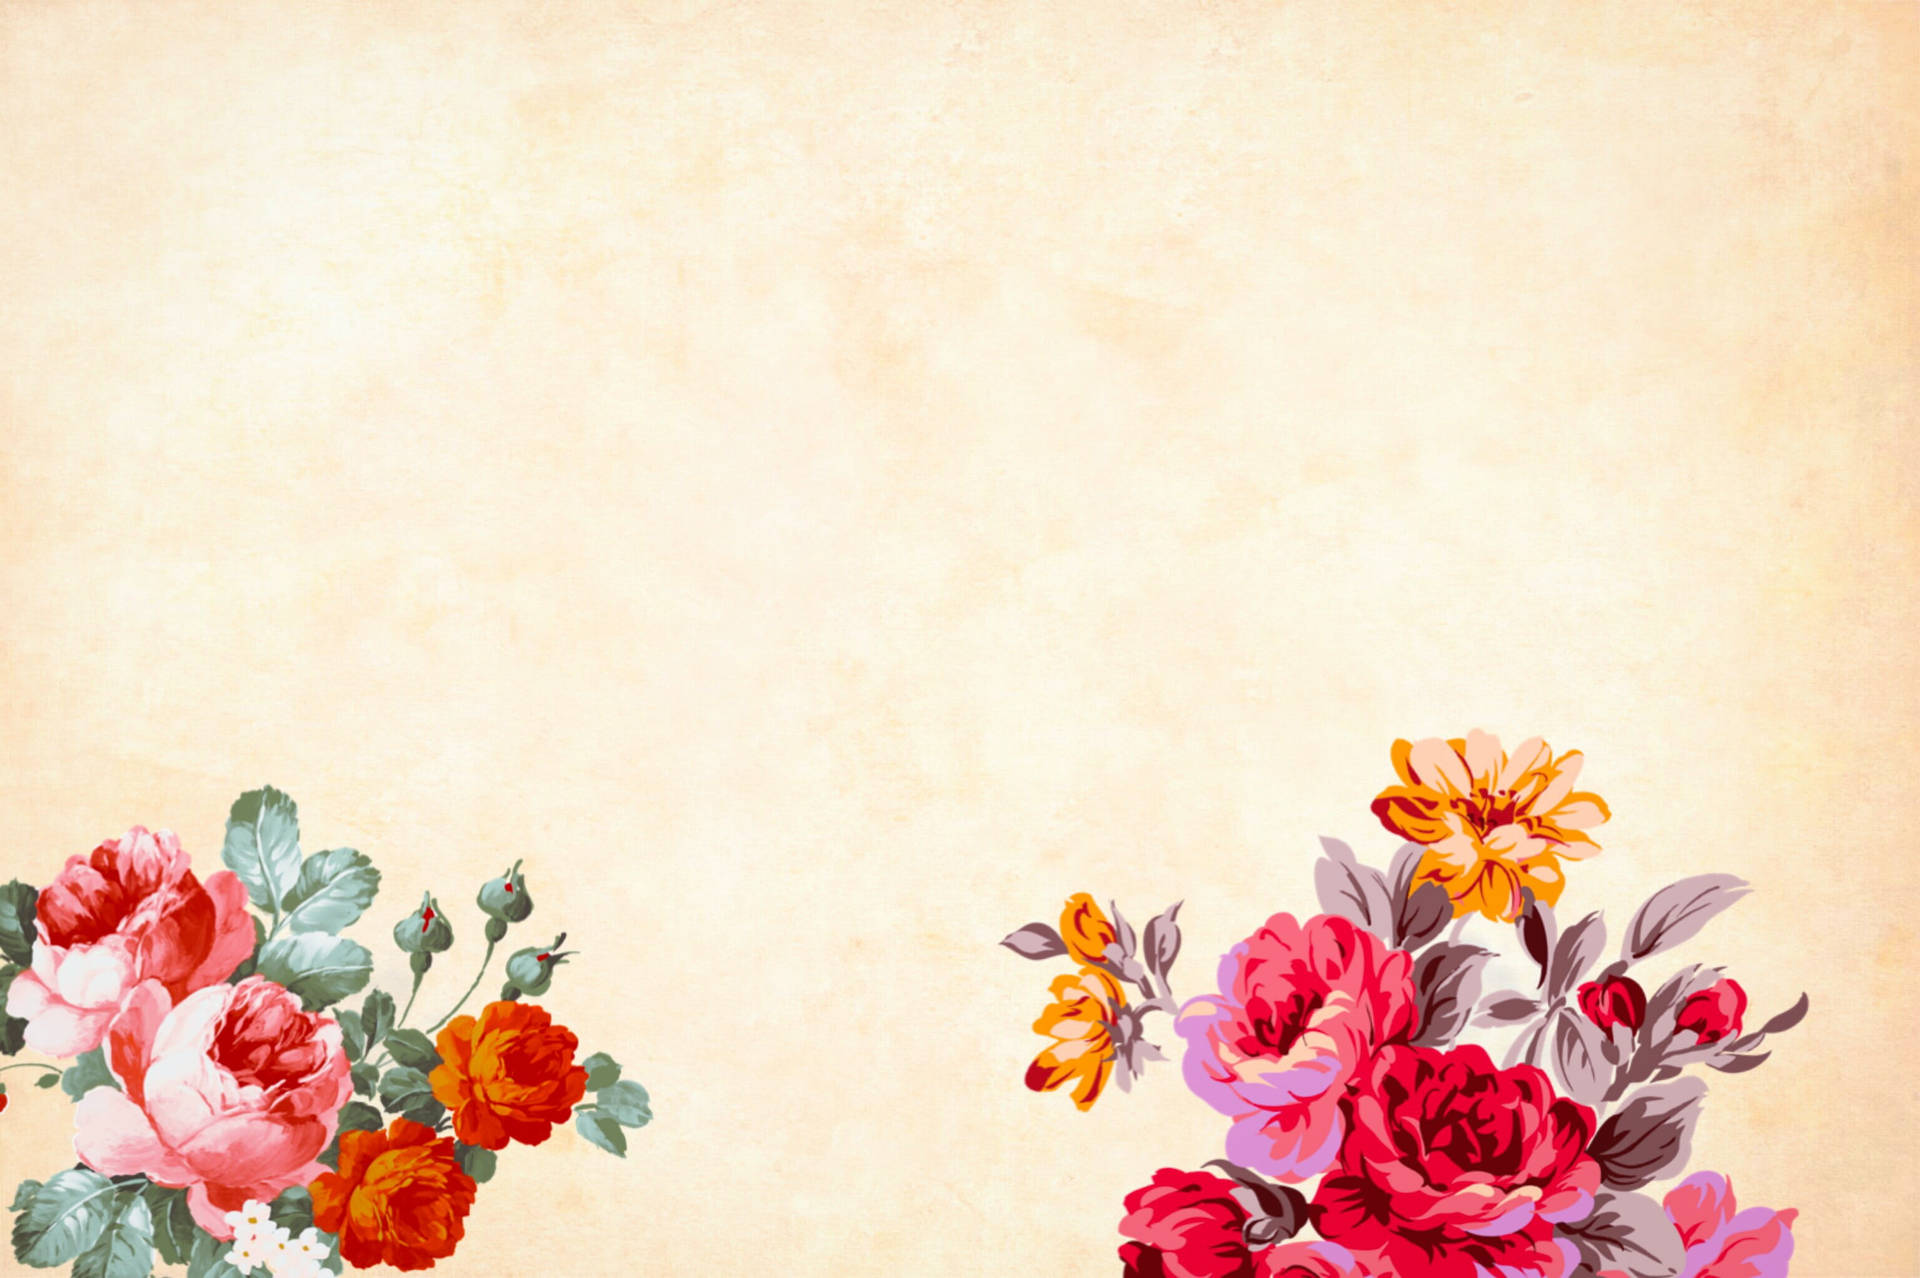 Background Design With Colorful Flowers Background